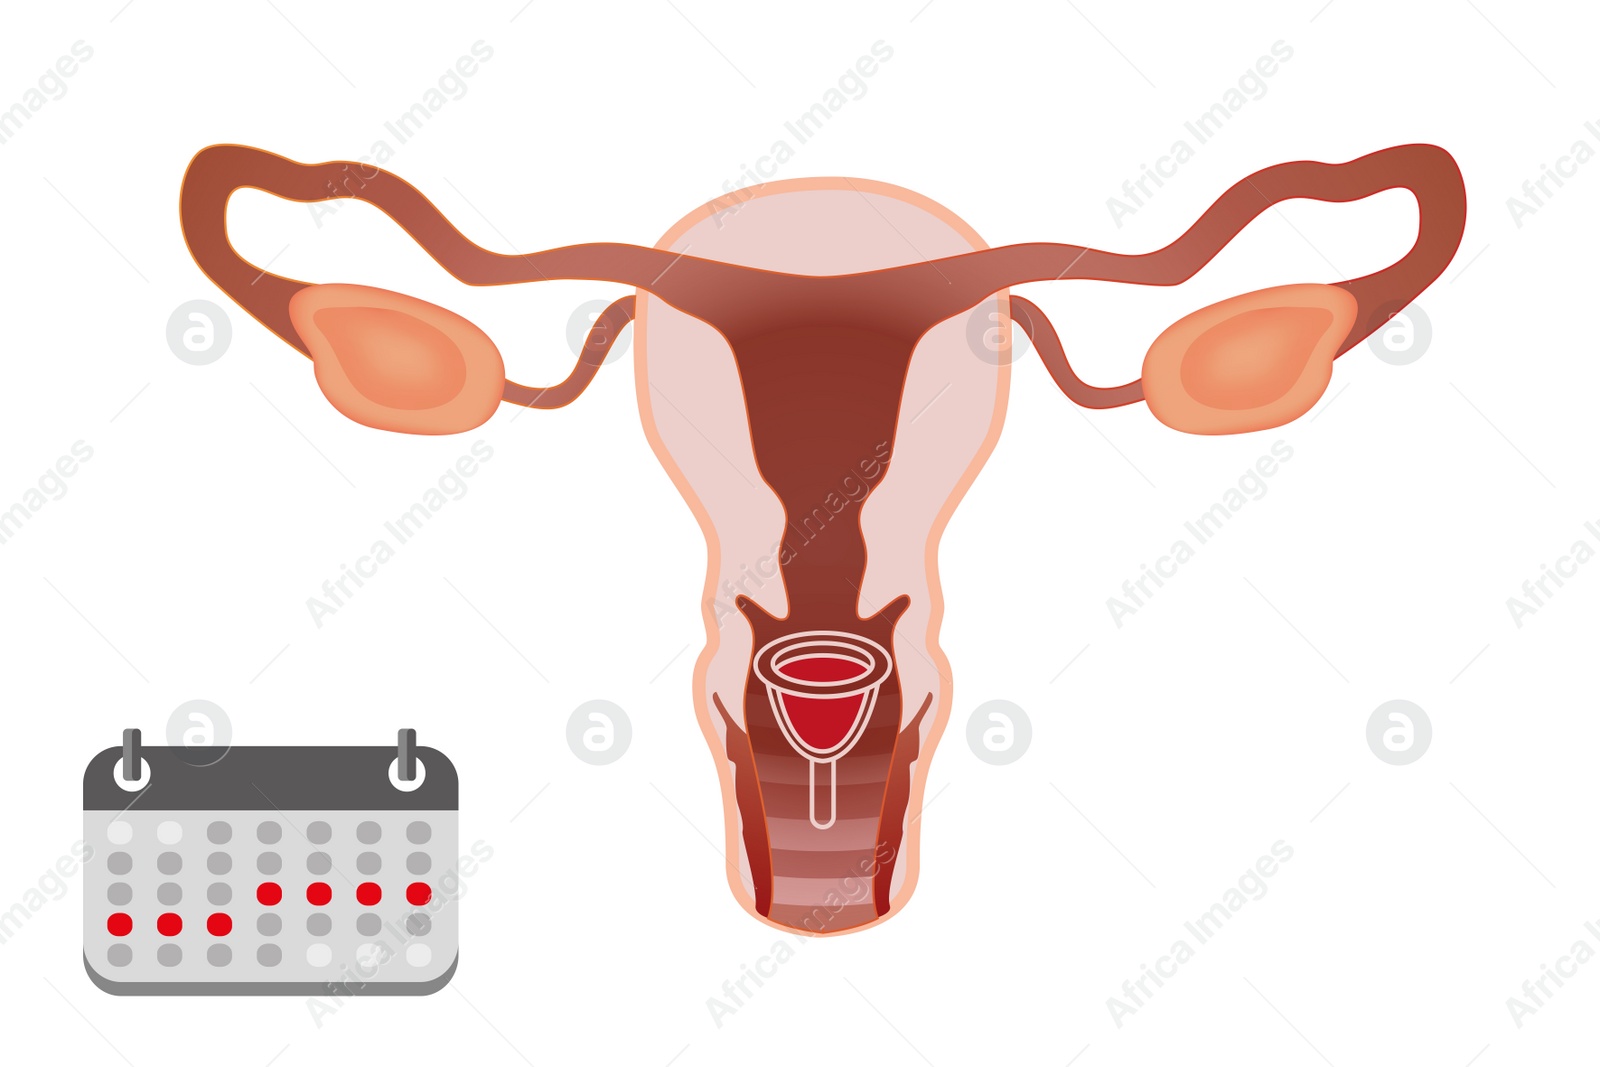 Illustration of Instruction how to use menstrual cup during period. Female reproductive system on white background, illustration